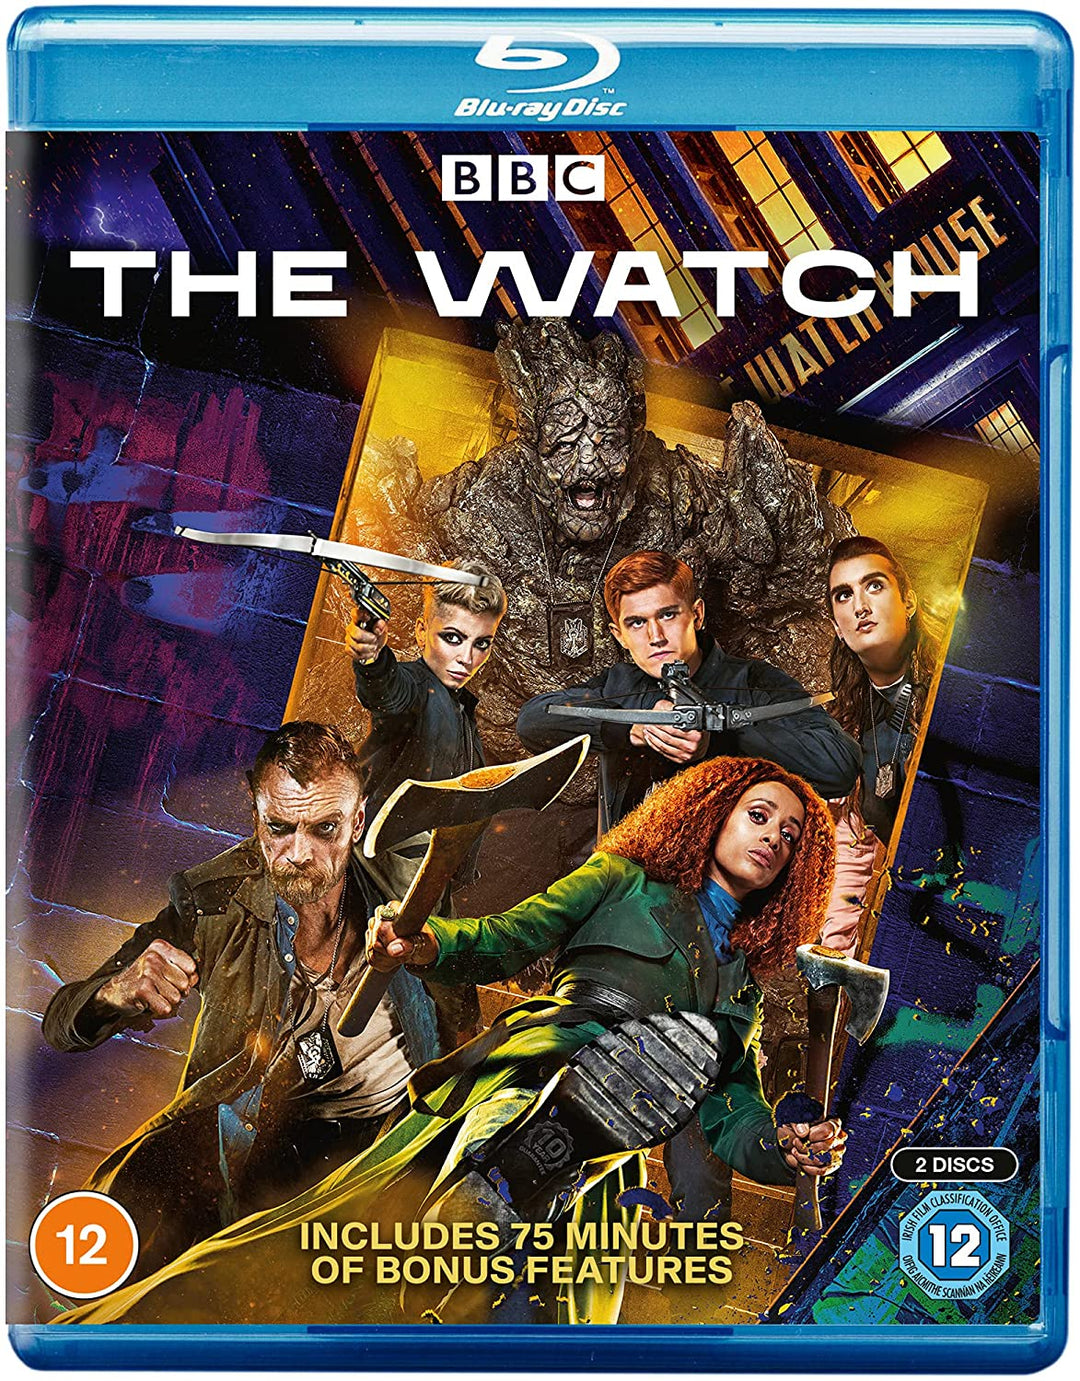 The Watch (includes 4 exclusive double-sided art cards) [2021] [Blu-ray]